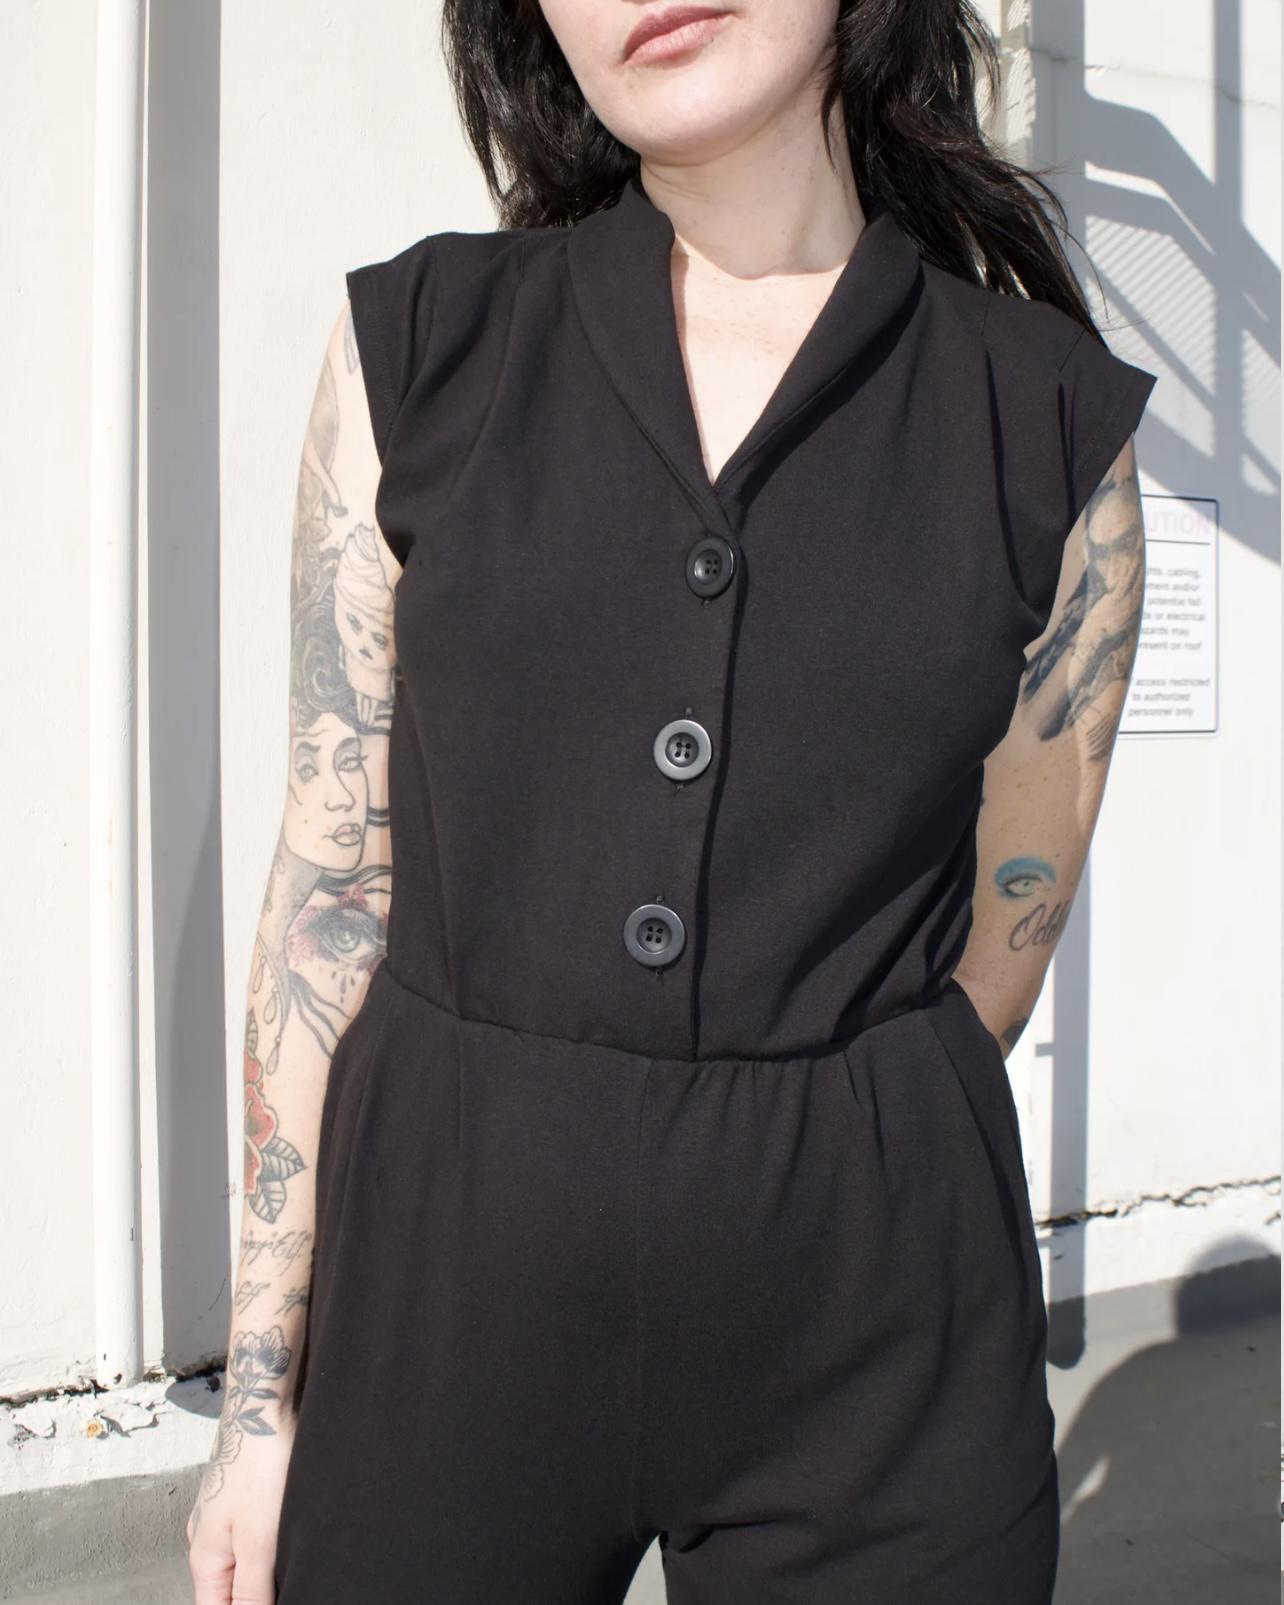 Black Button Down Jumpsuit with Pockets